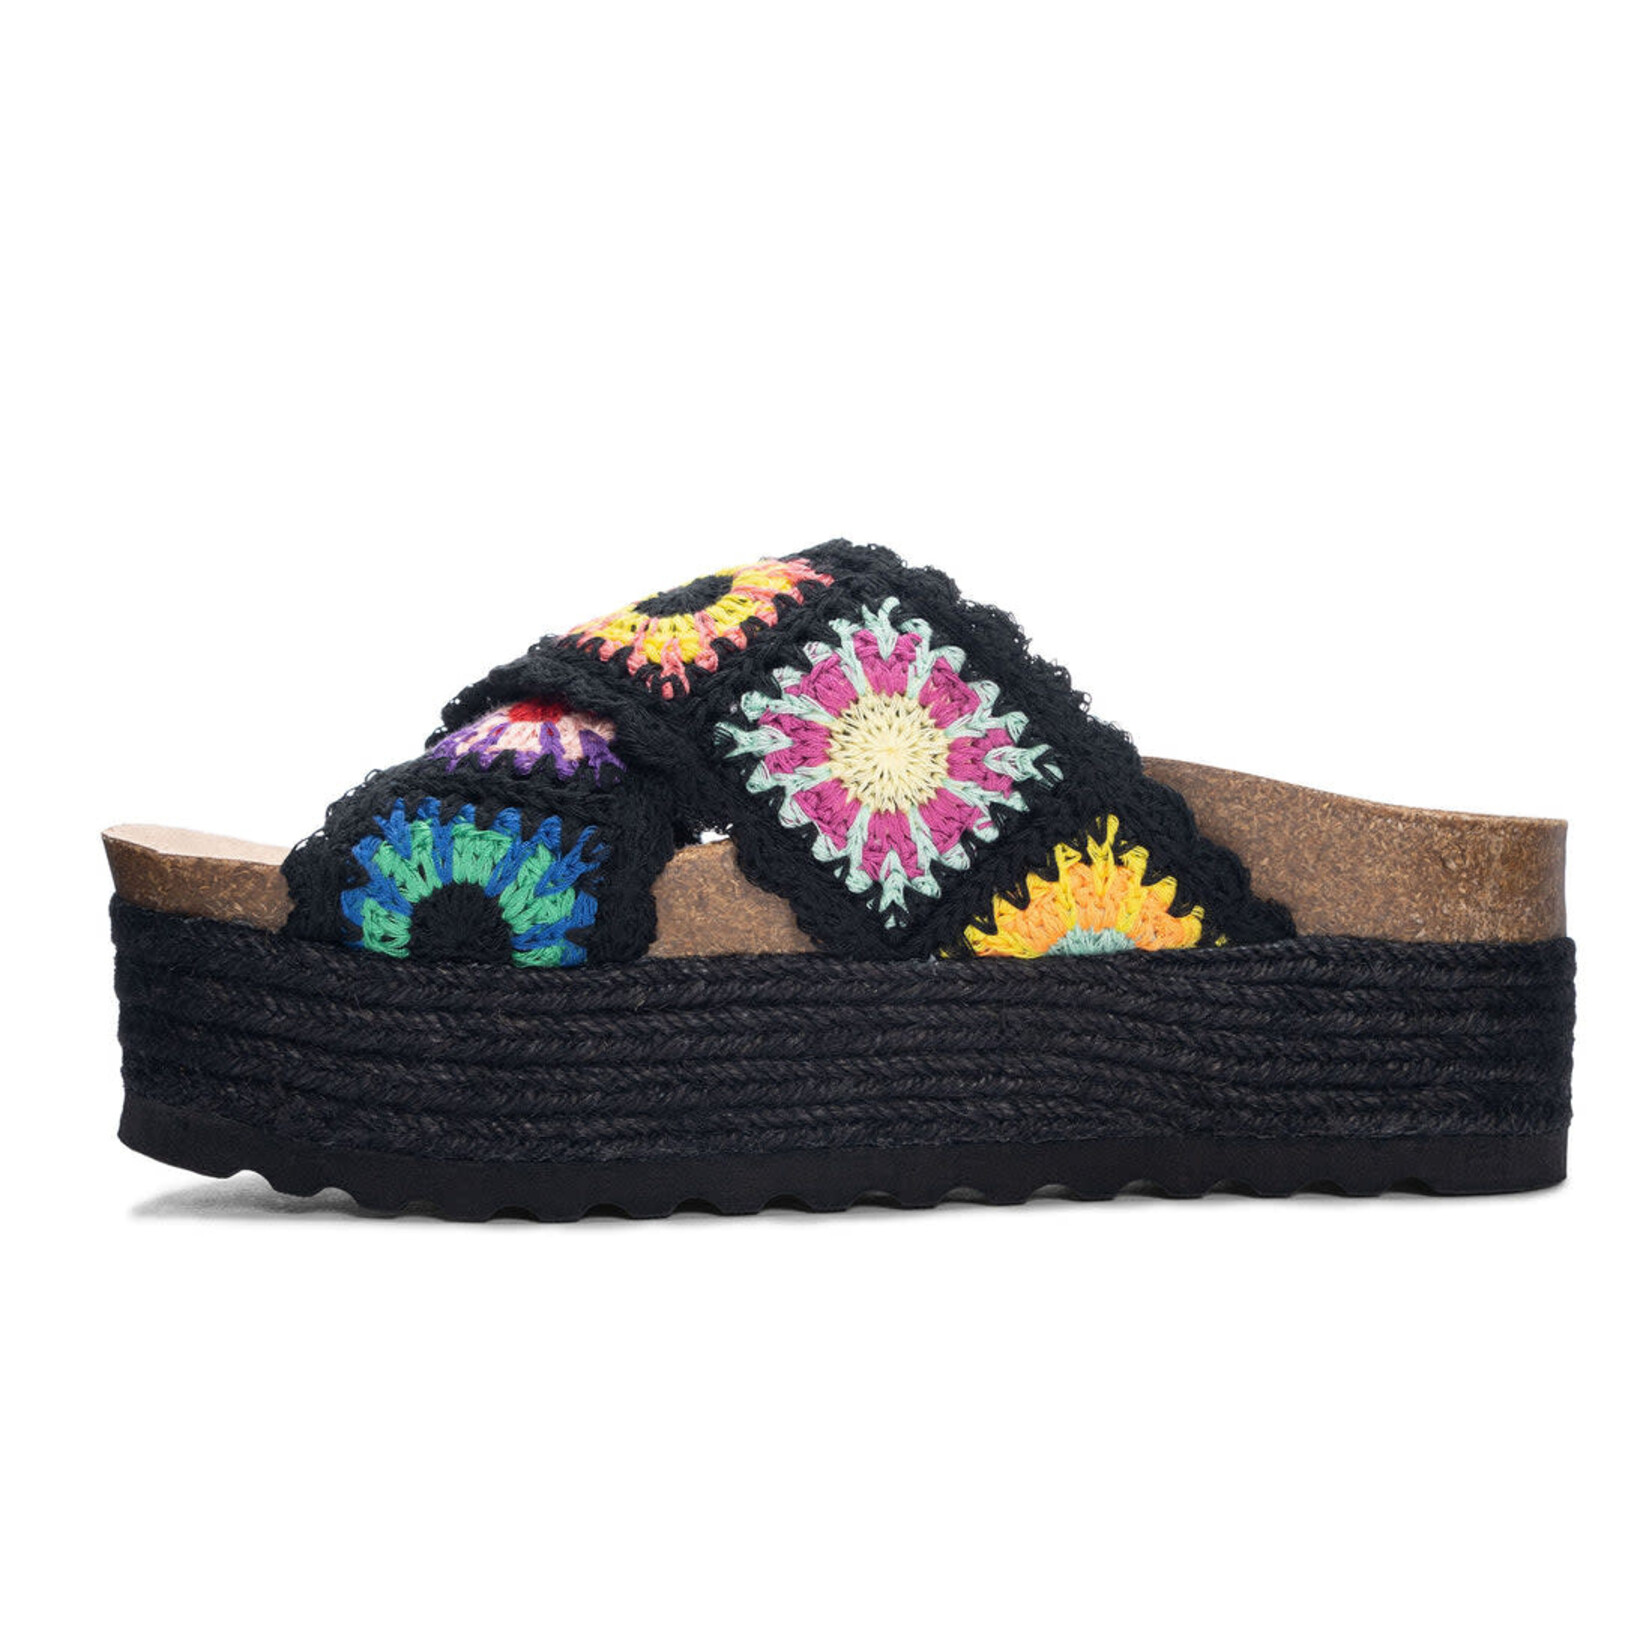 Chinese Laundry Plays in Black Crochet Slides by Chinese Laundry